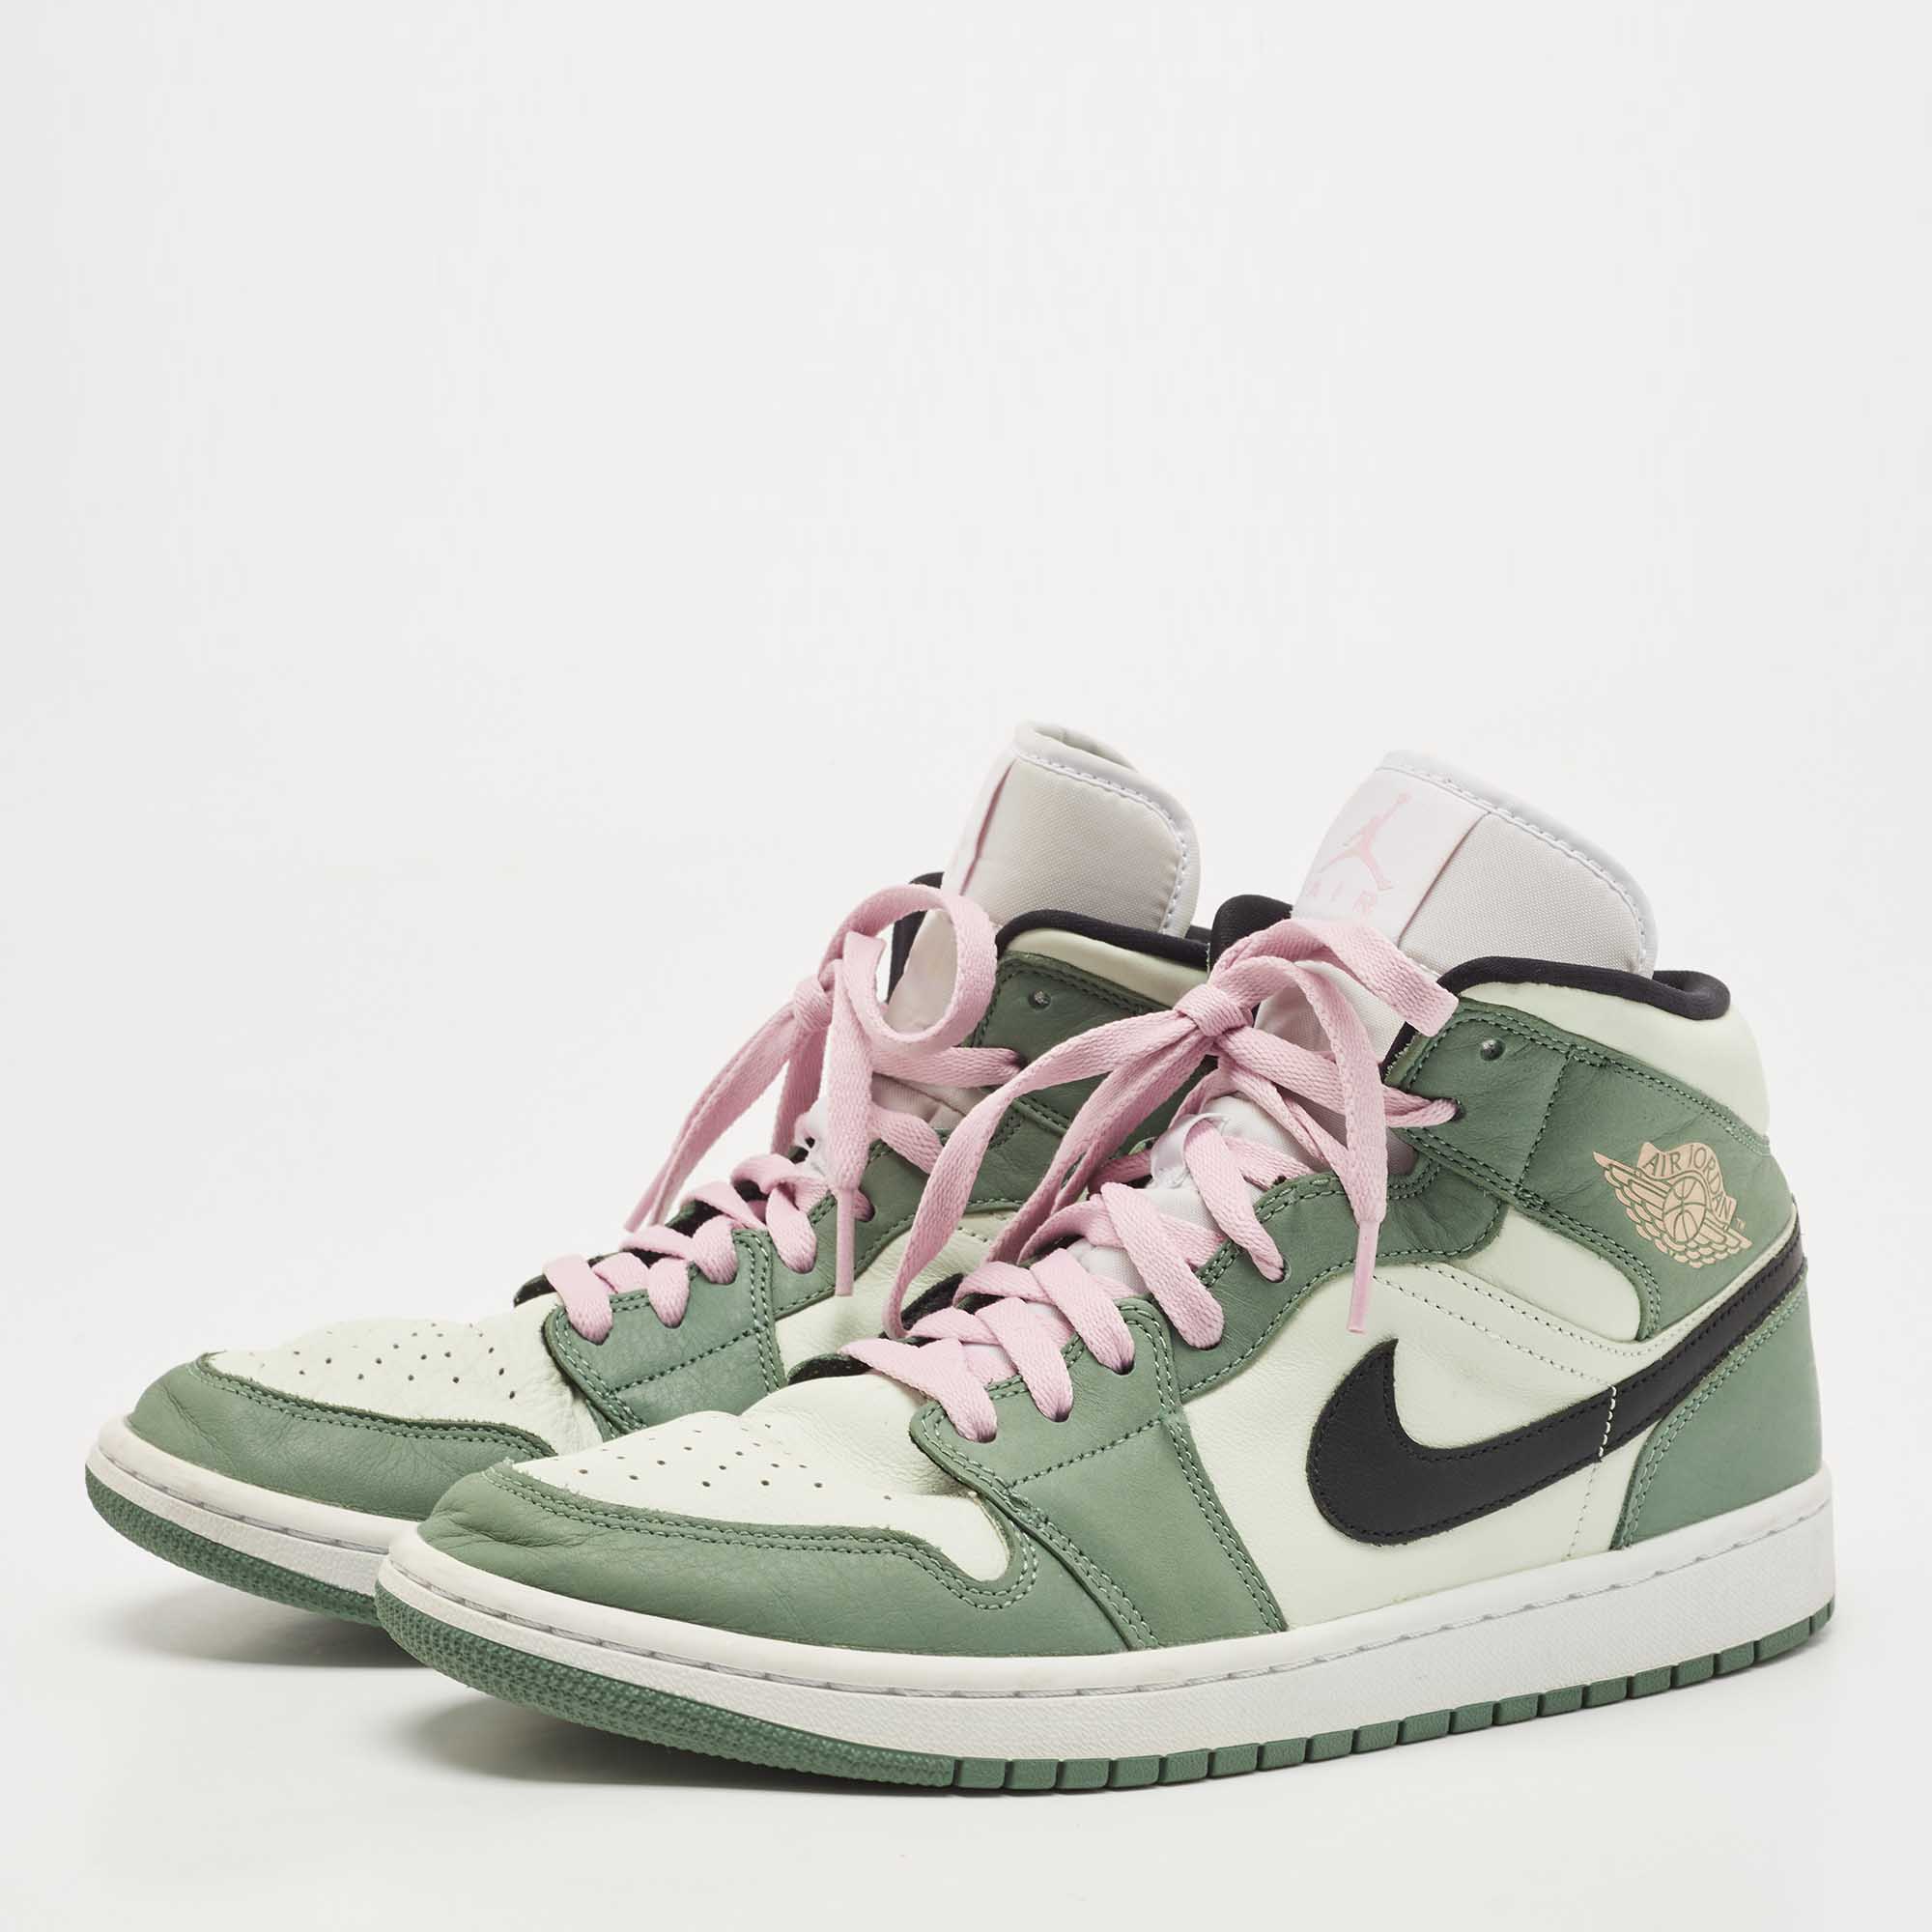 

Air Jordan Two Tone Leather Mid Dutch Green High Top Sneakers Size